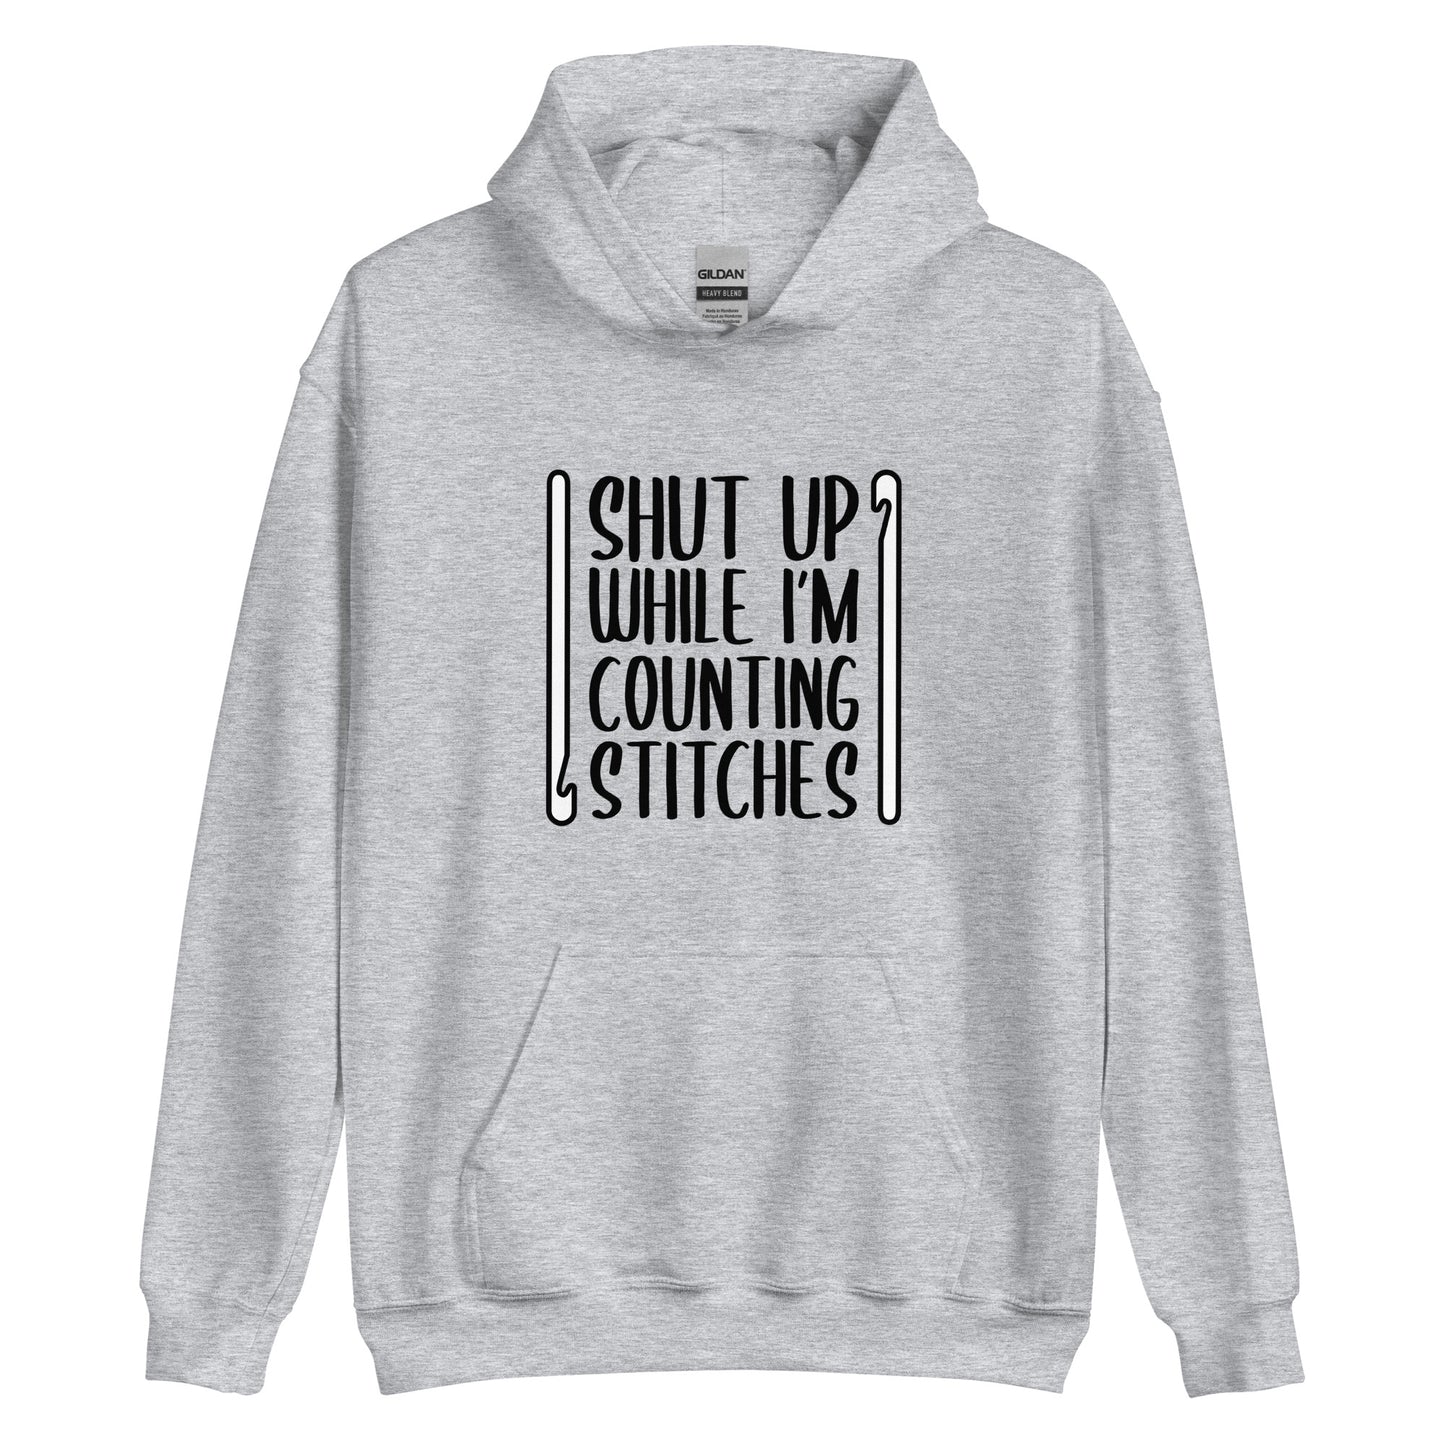 A grey hooded sweatshirt featuring black text that reads "Shut up while I'm counting stitches." The text is framed by a crochet hook to the left and right.